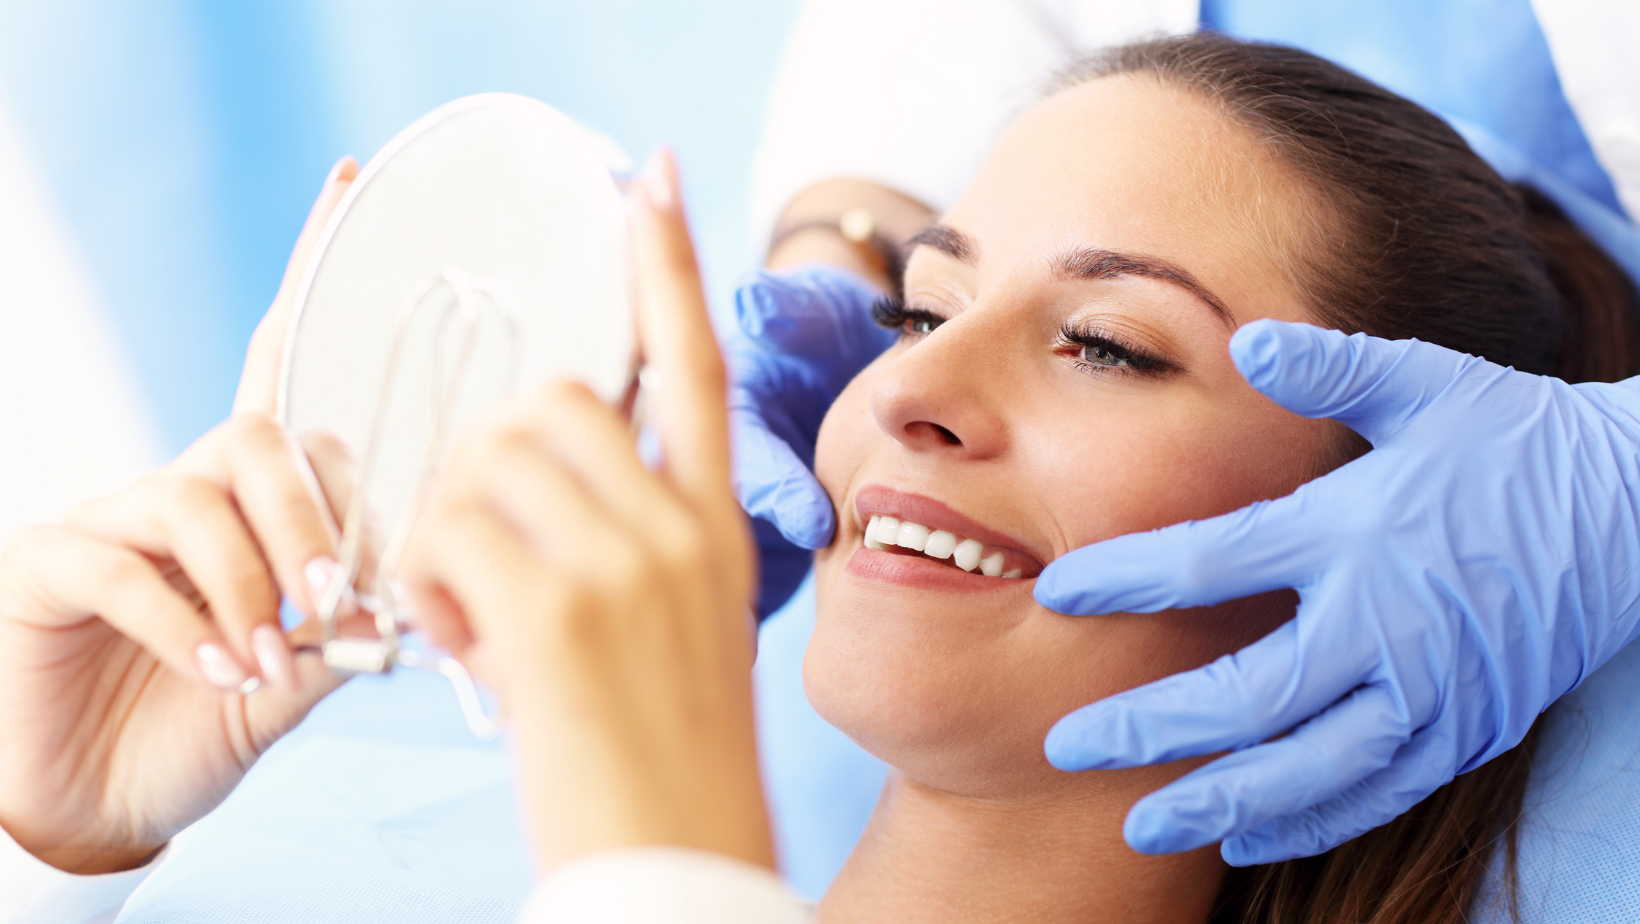 Woman at dentist smiling in mirror | gum disease therapy in Coraopolis, PA